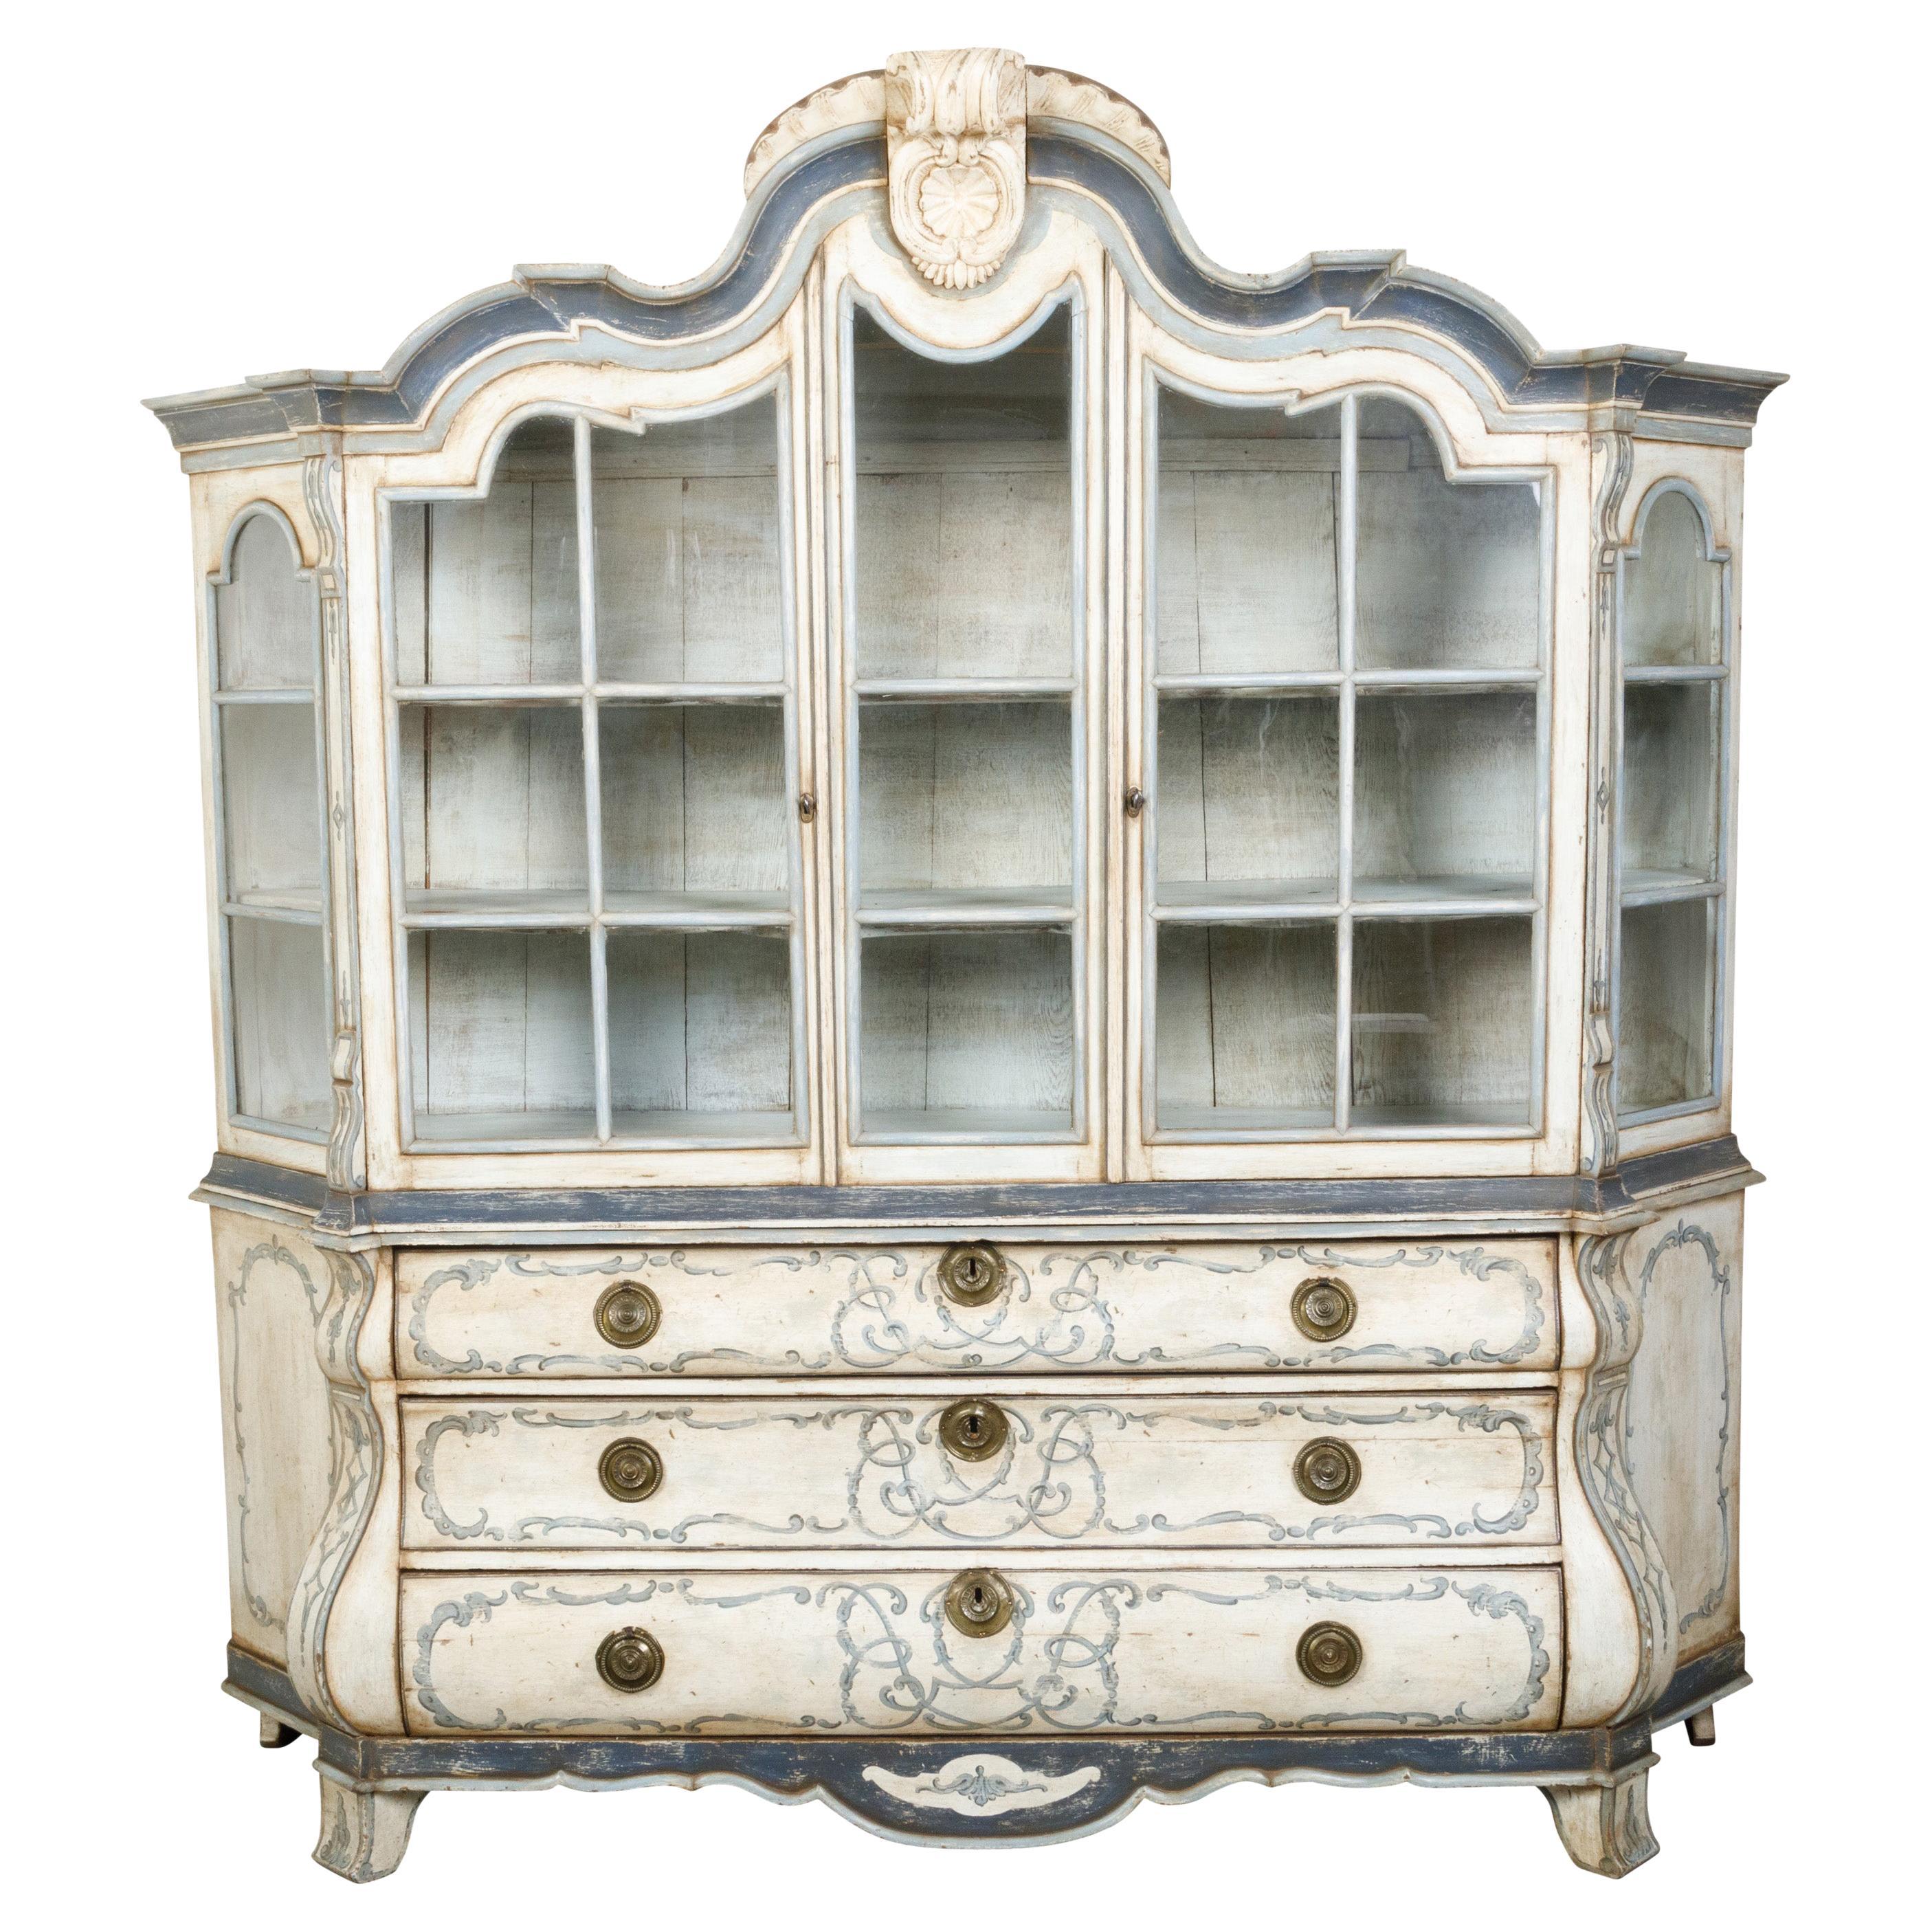 Large Rococo Style Painted Wood Dutch Cabinet with Glass Doors and Bombé Chest